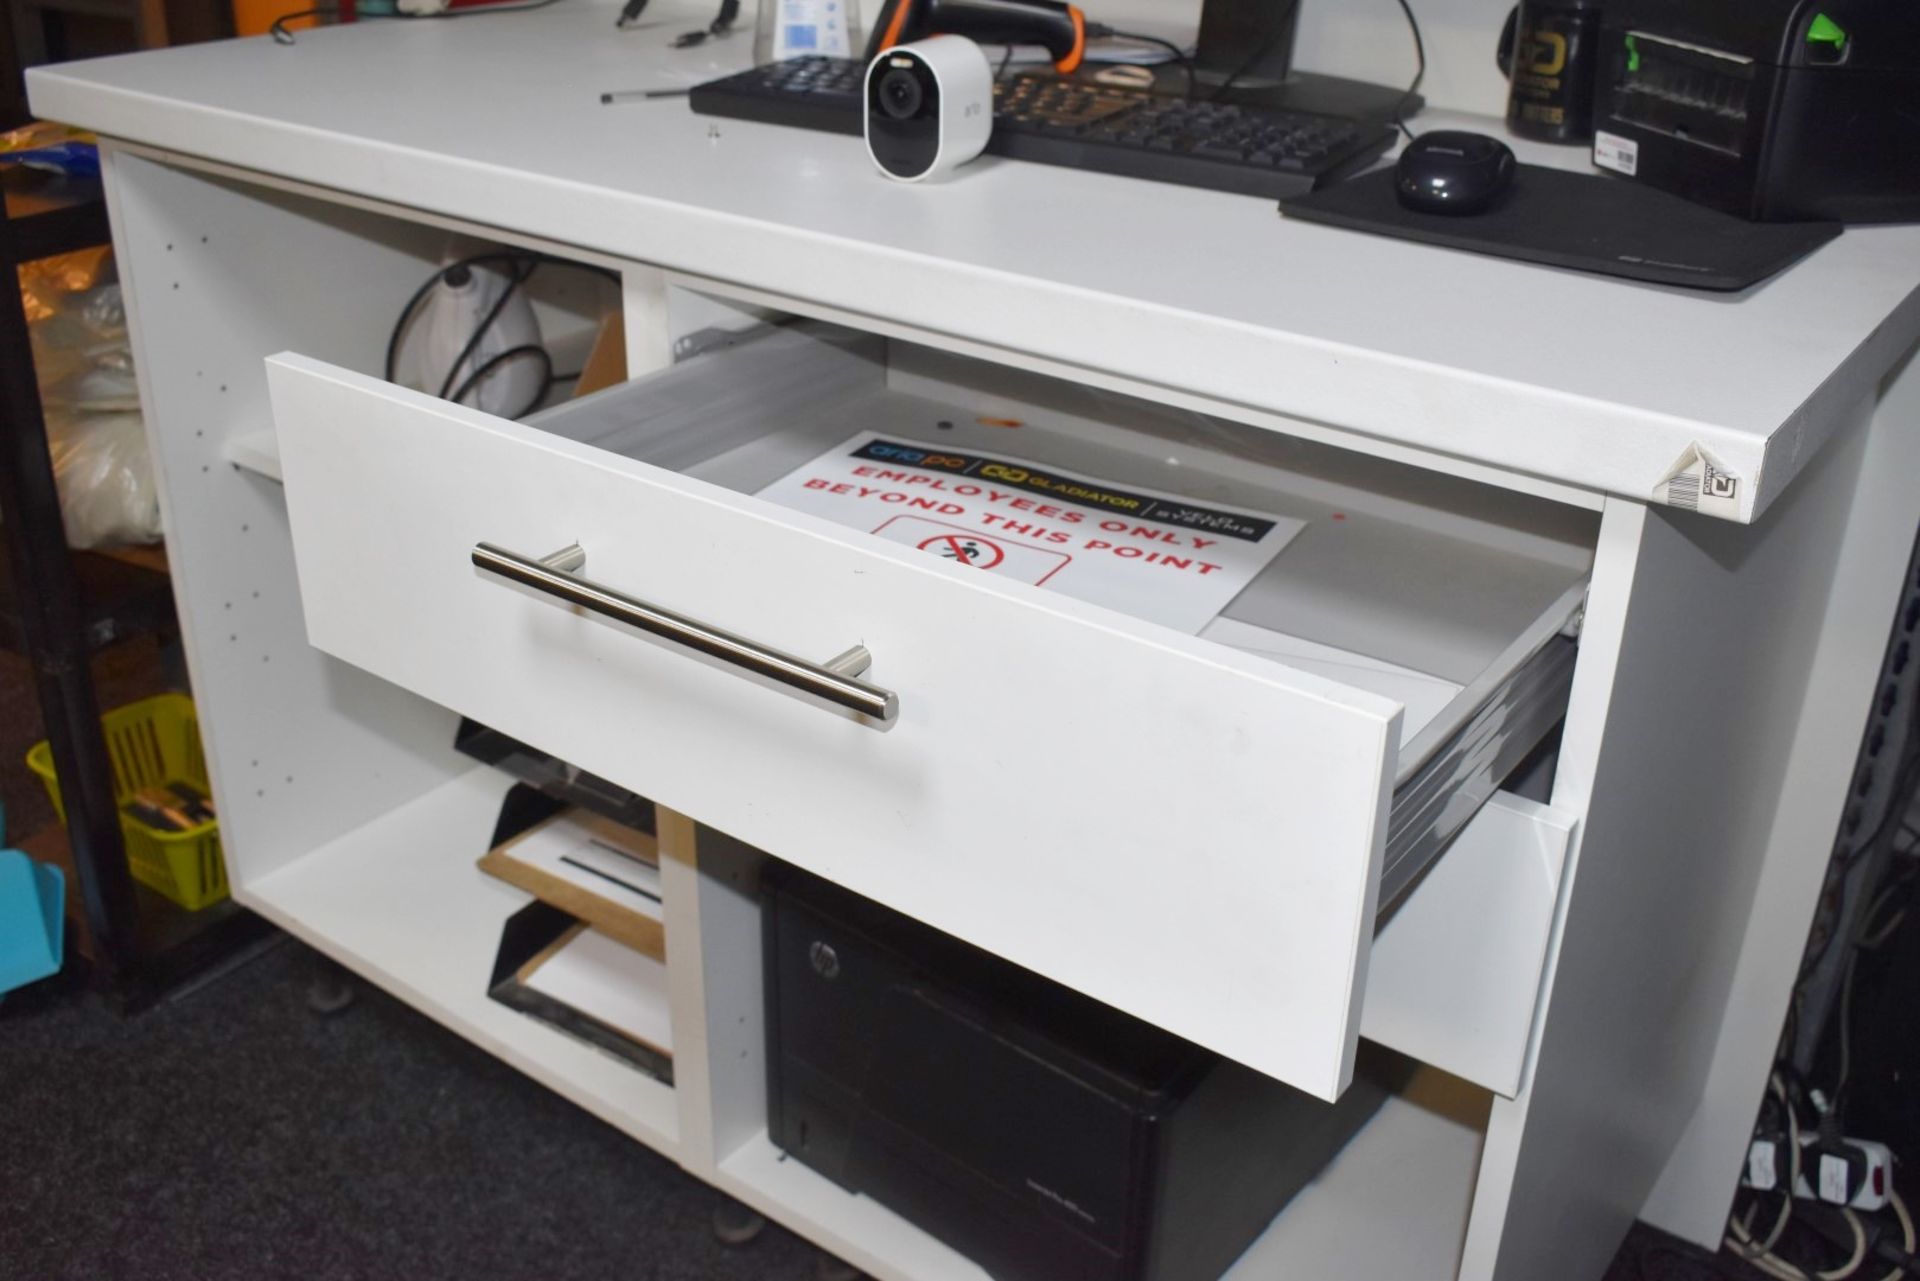 1 x Workstation Unit in White - Features Drawers, Shelves, Worktop and Upstand - Image 2 of 2